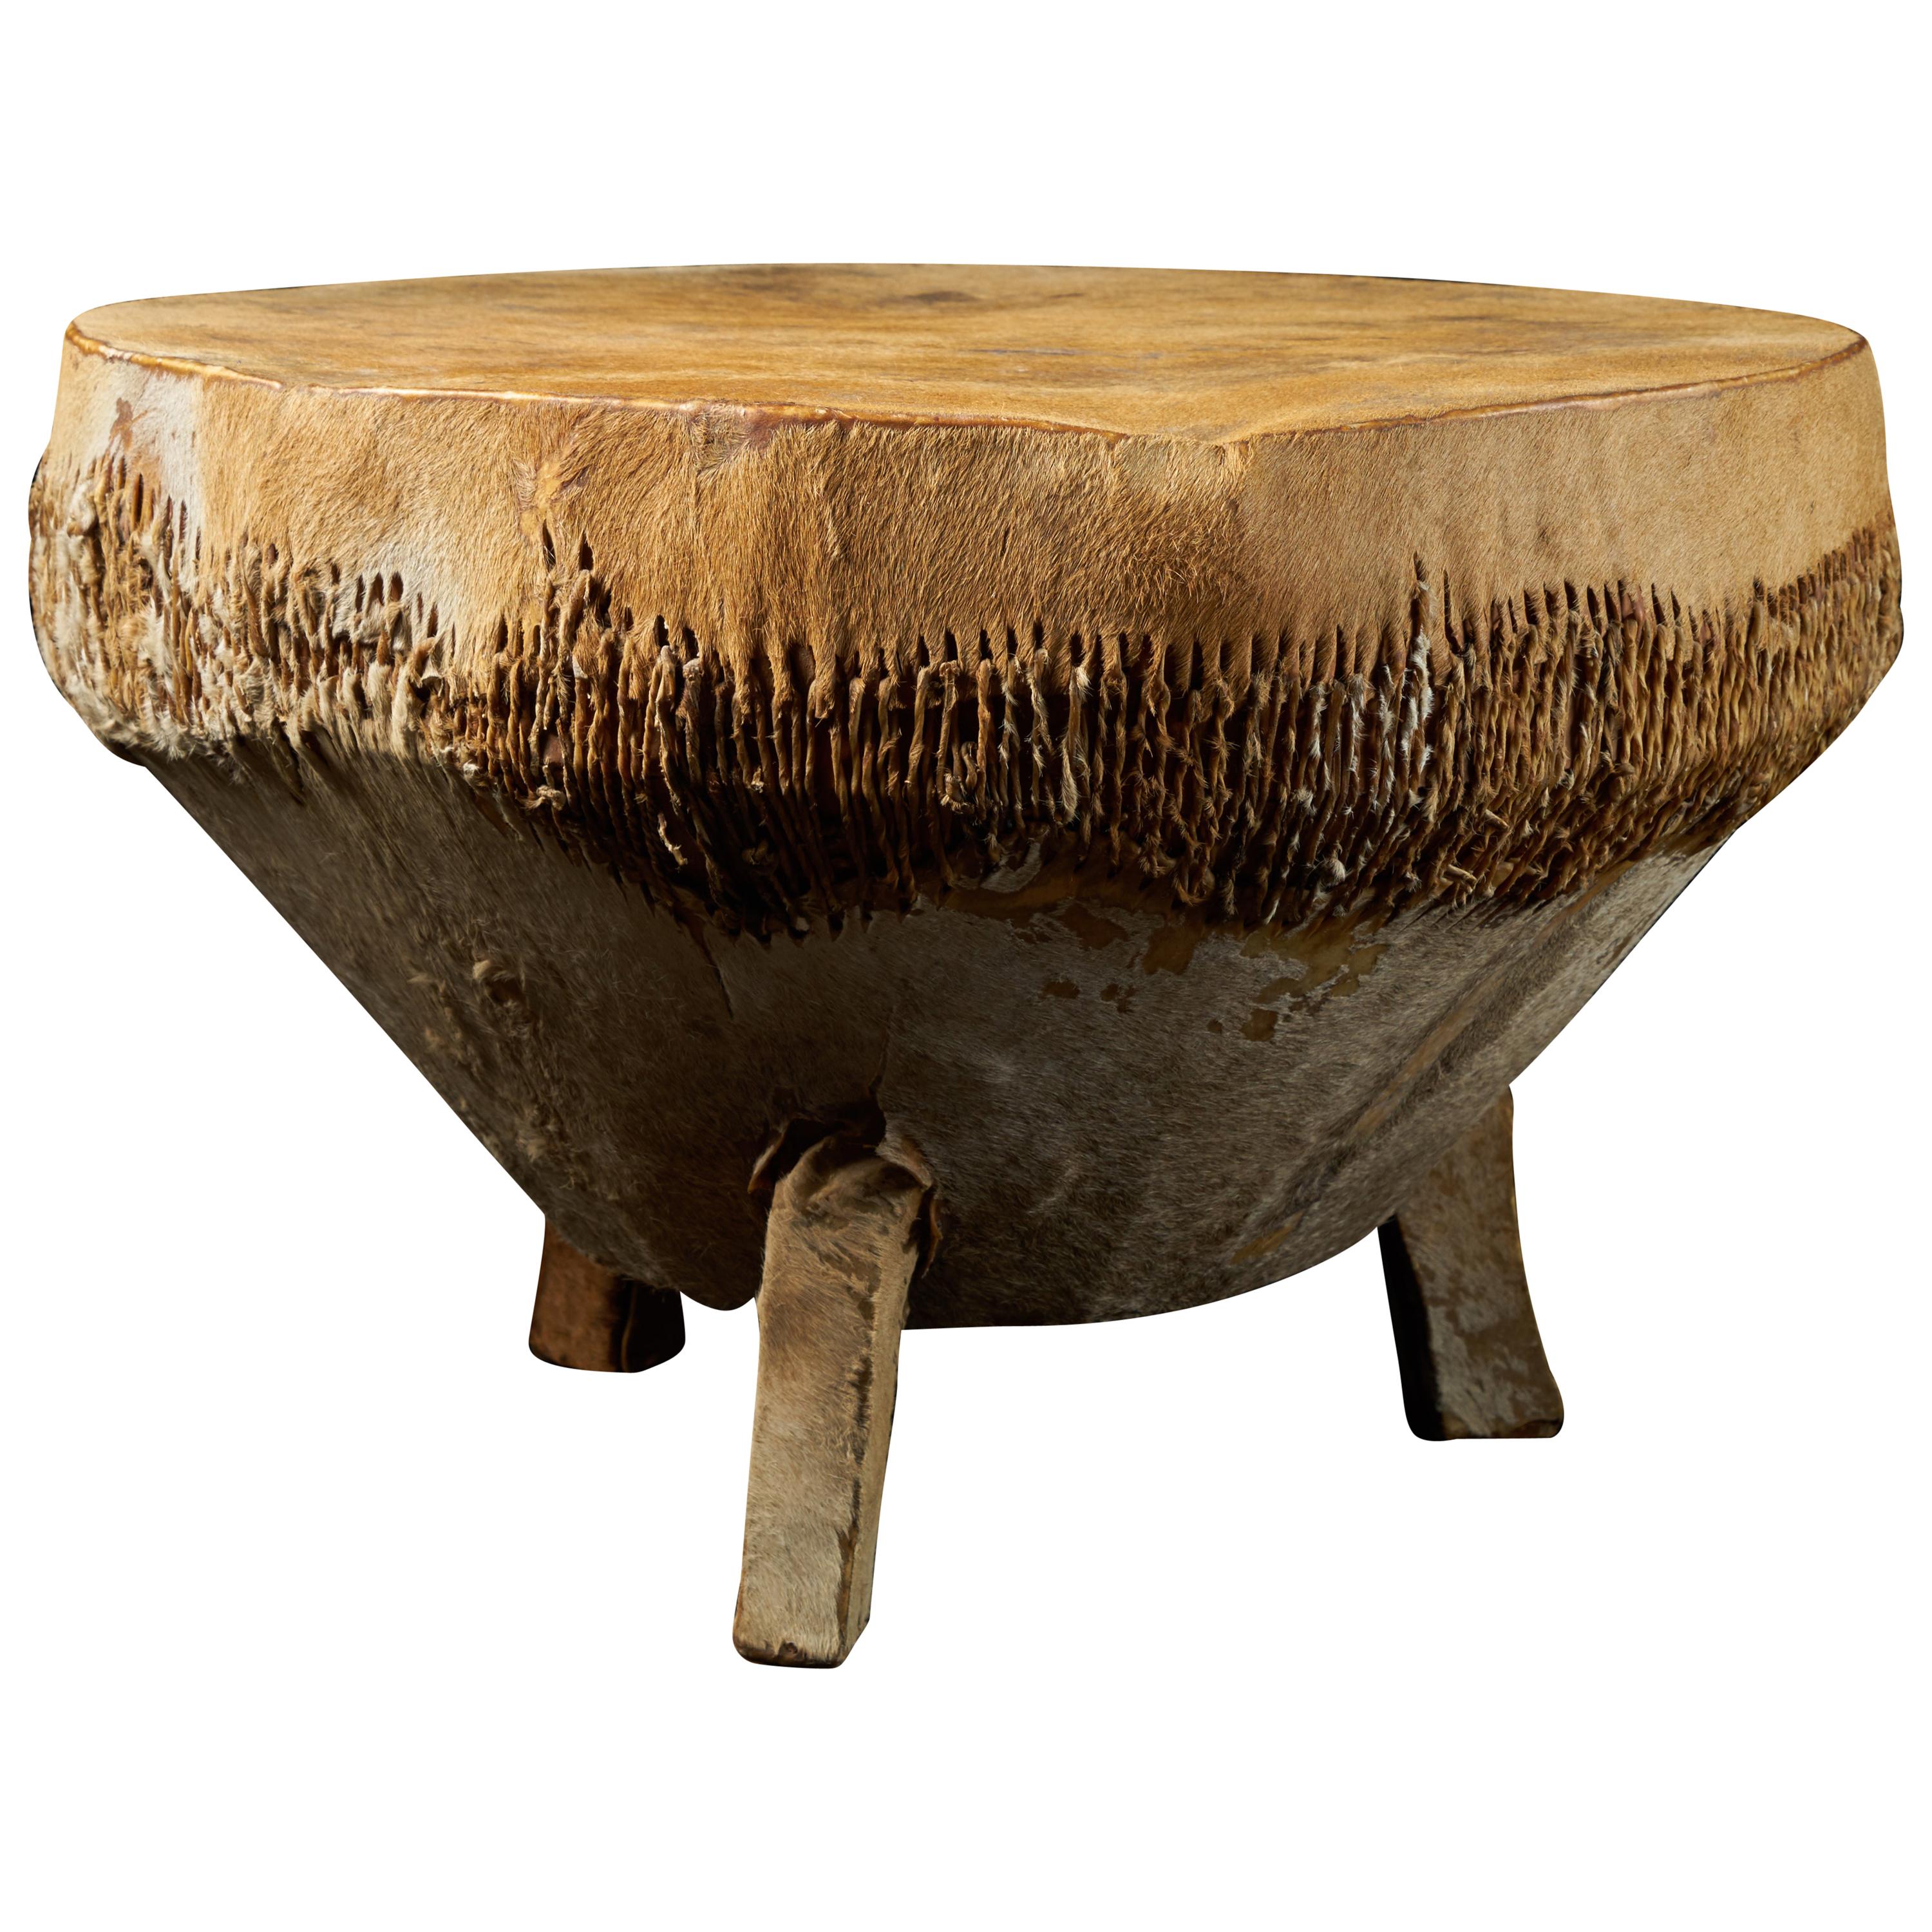 Wooden Drum with Shell and Membrane in Animal Skin